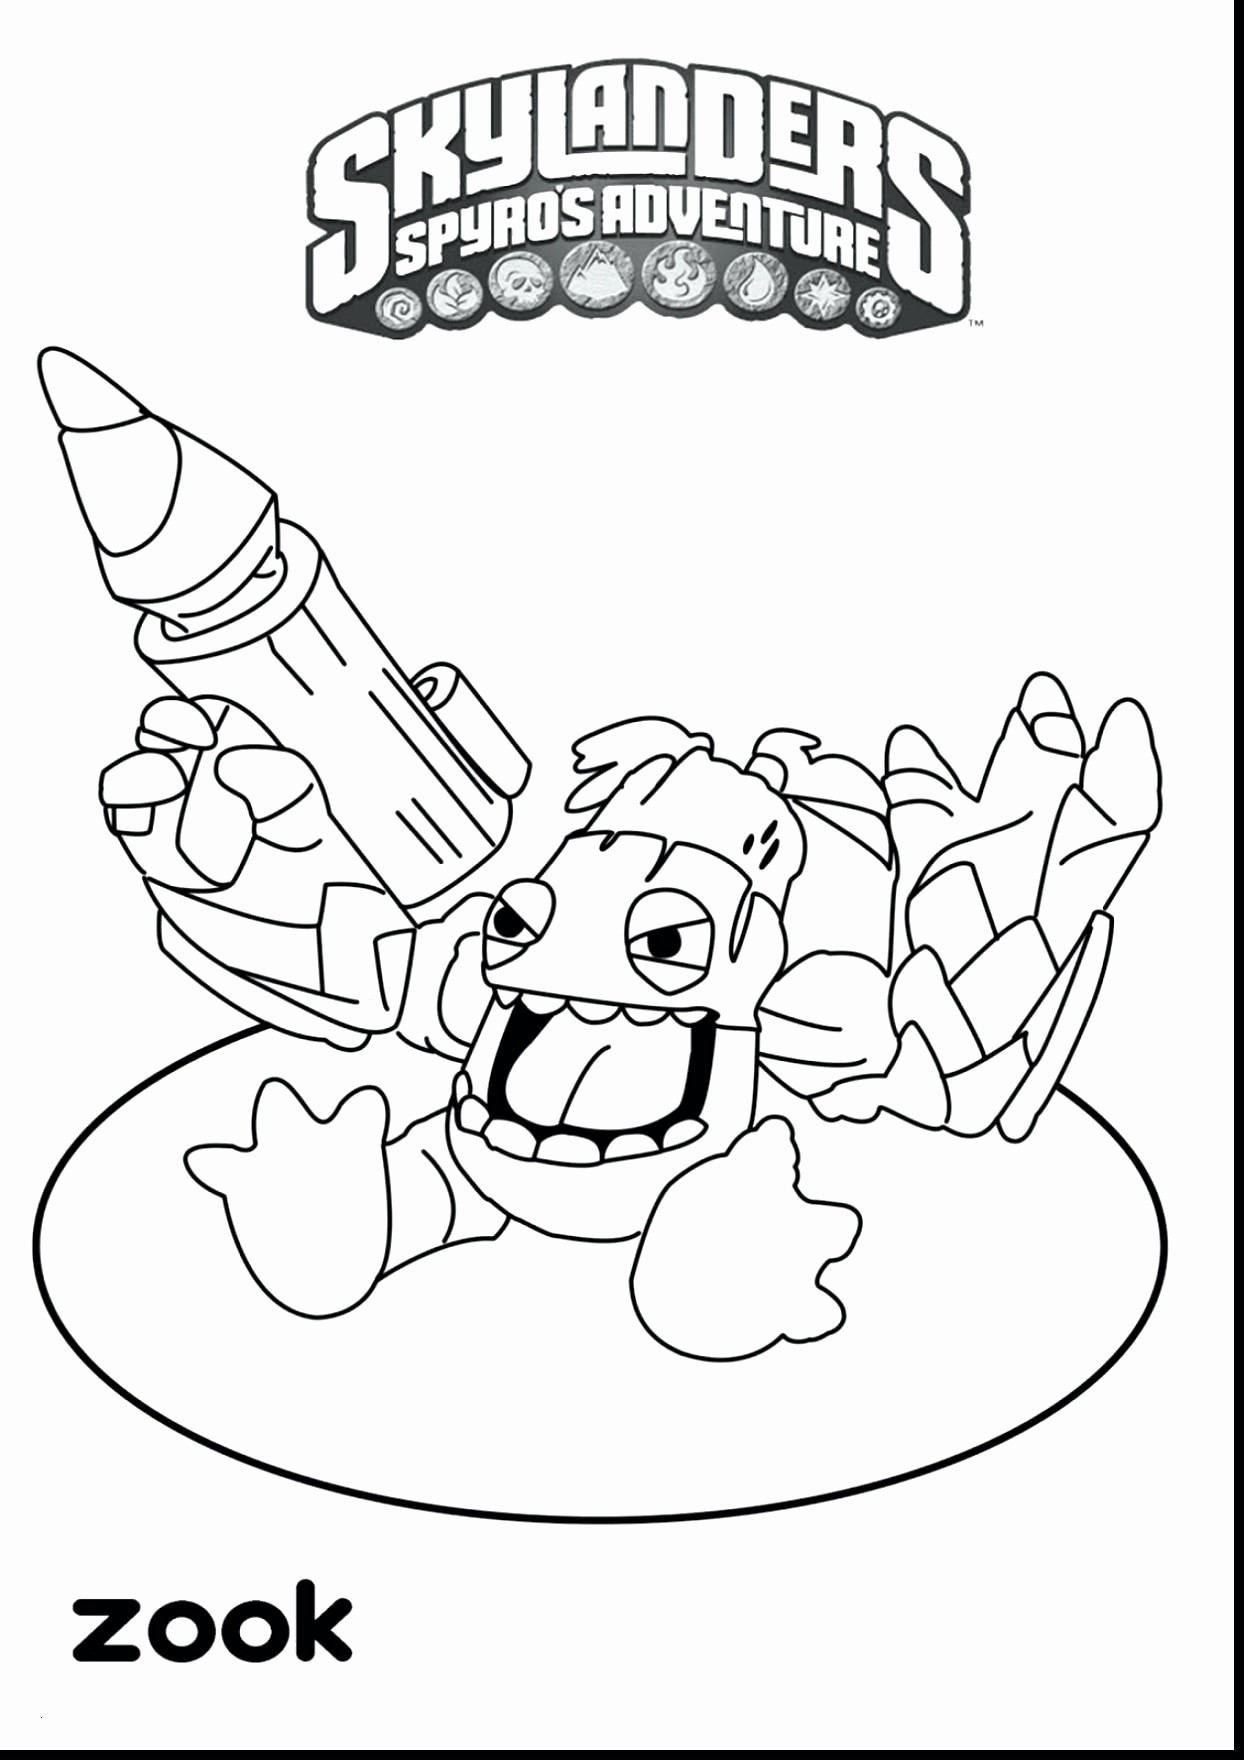 Christopher Columbus Coloring Pages Crayola Earth Day Coloring Pages Awesome Planets Coloring Pages